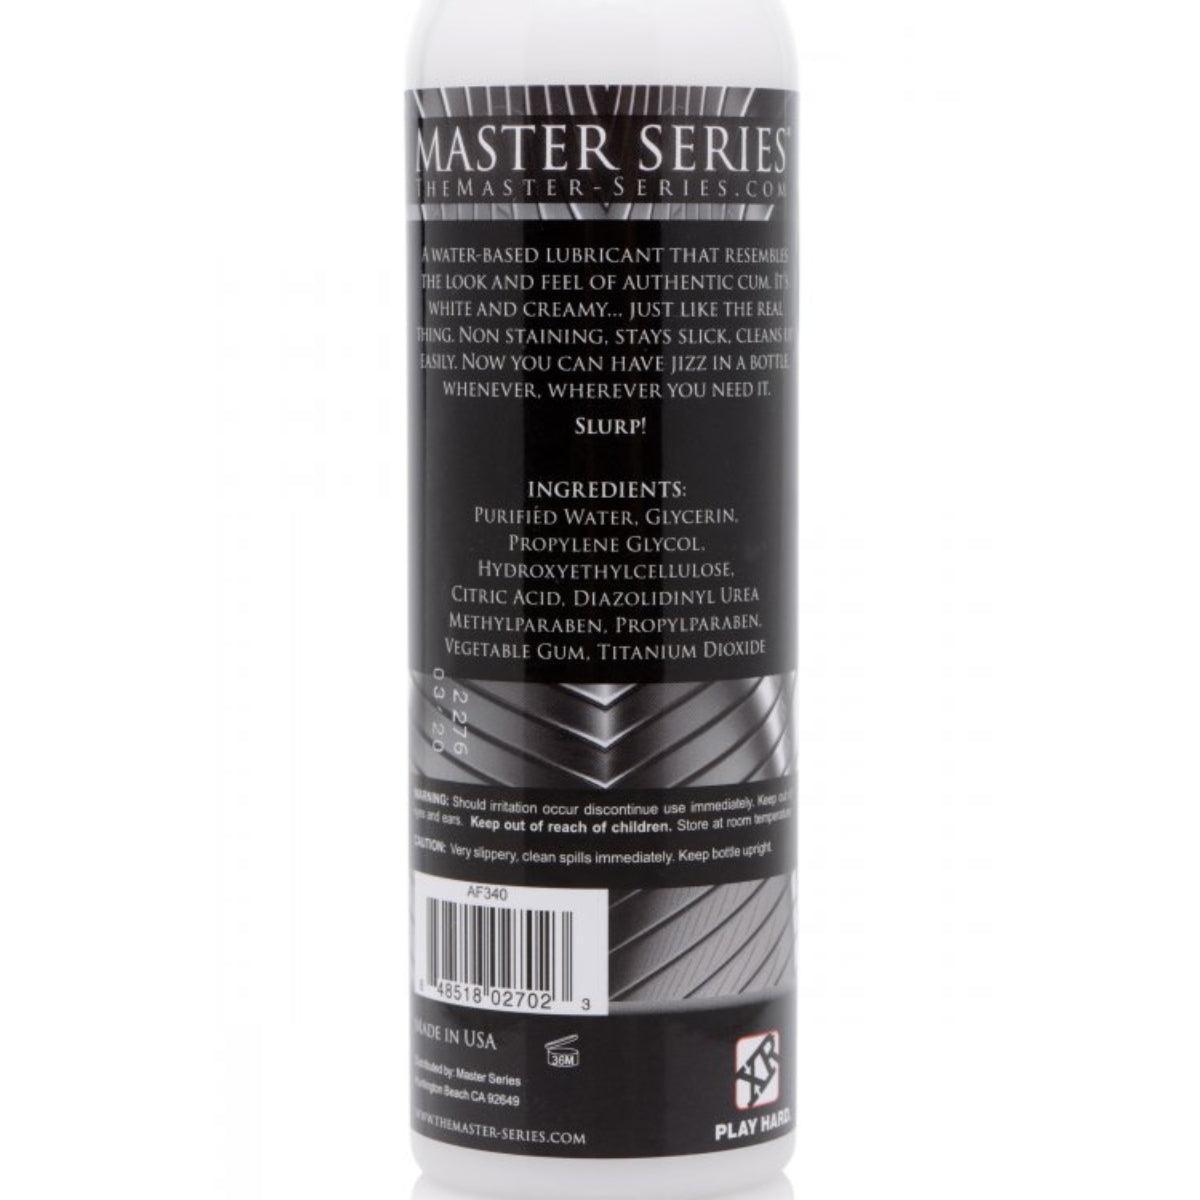 Master Series Jizz Unscented Water Based Lube 8oz